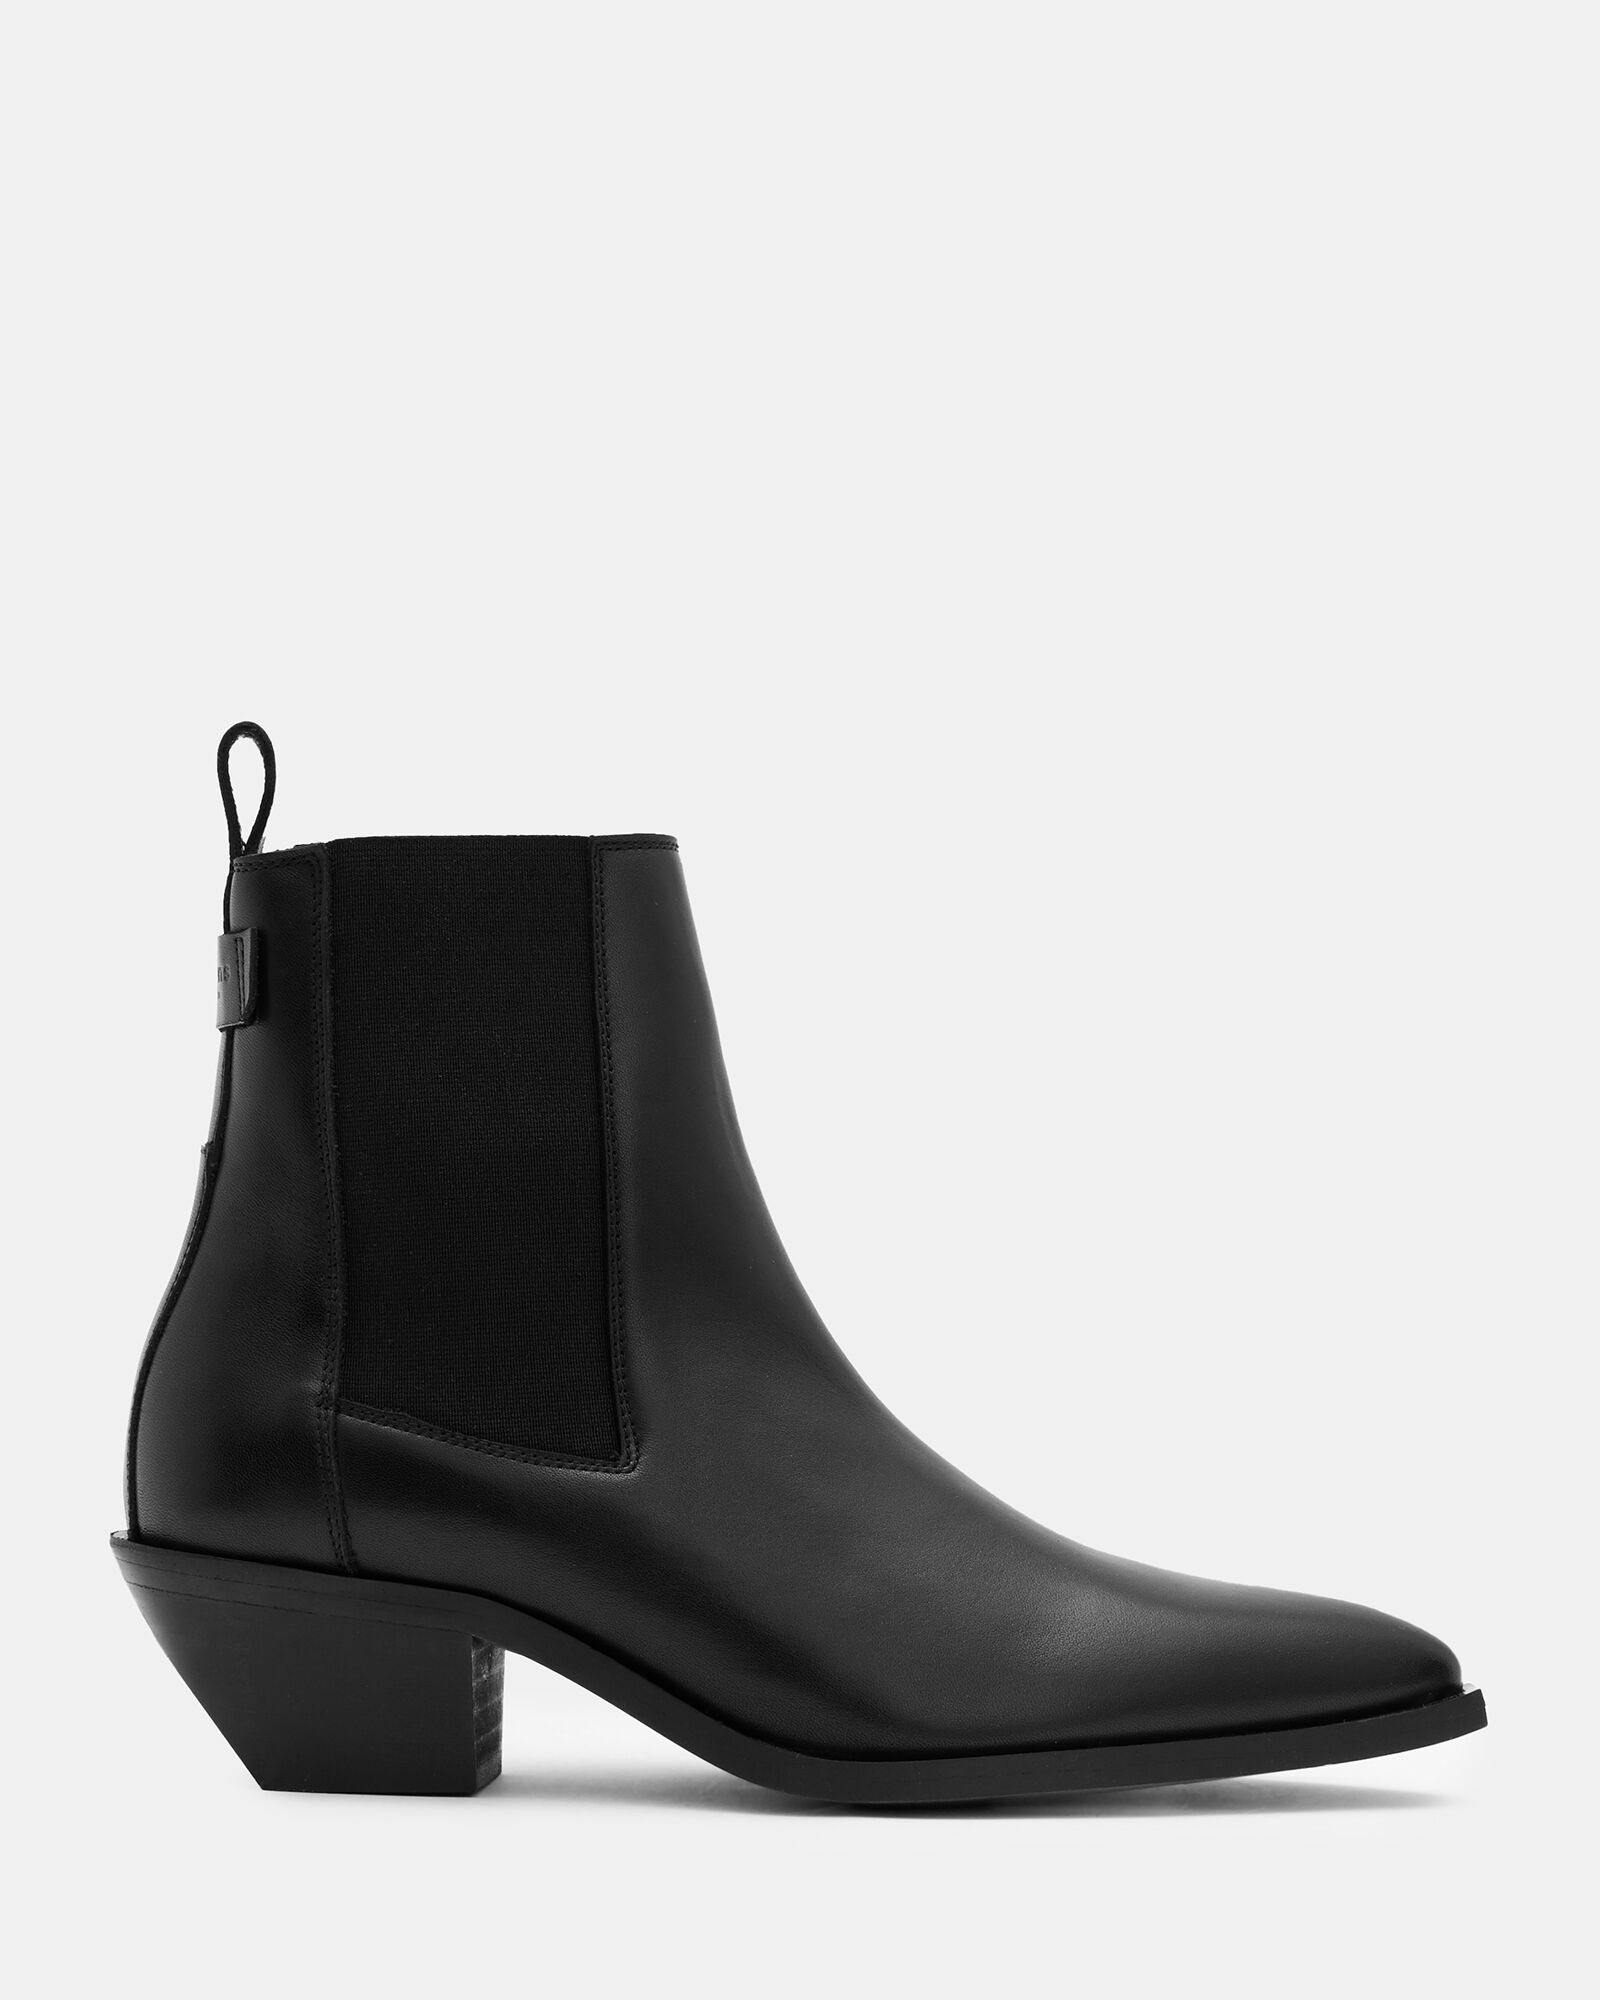 Fox Pointed Toe Leather Chelsea Boots Black | ALLSAINTS